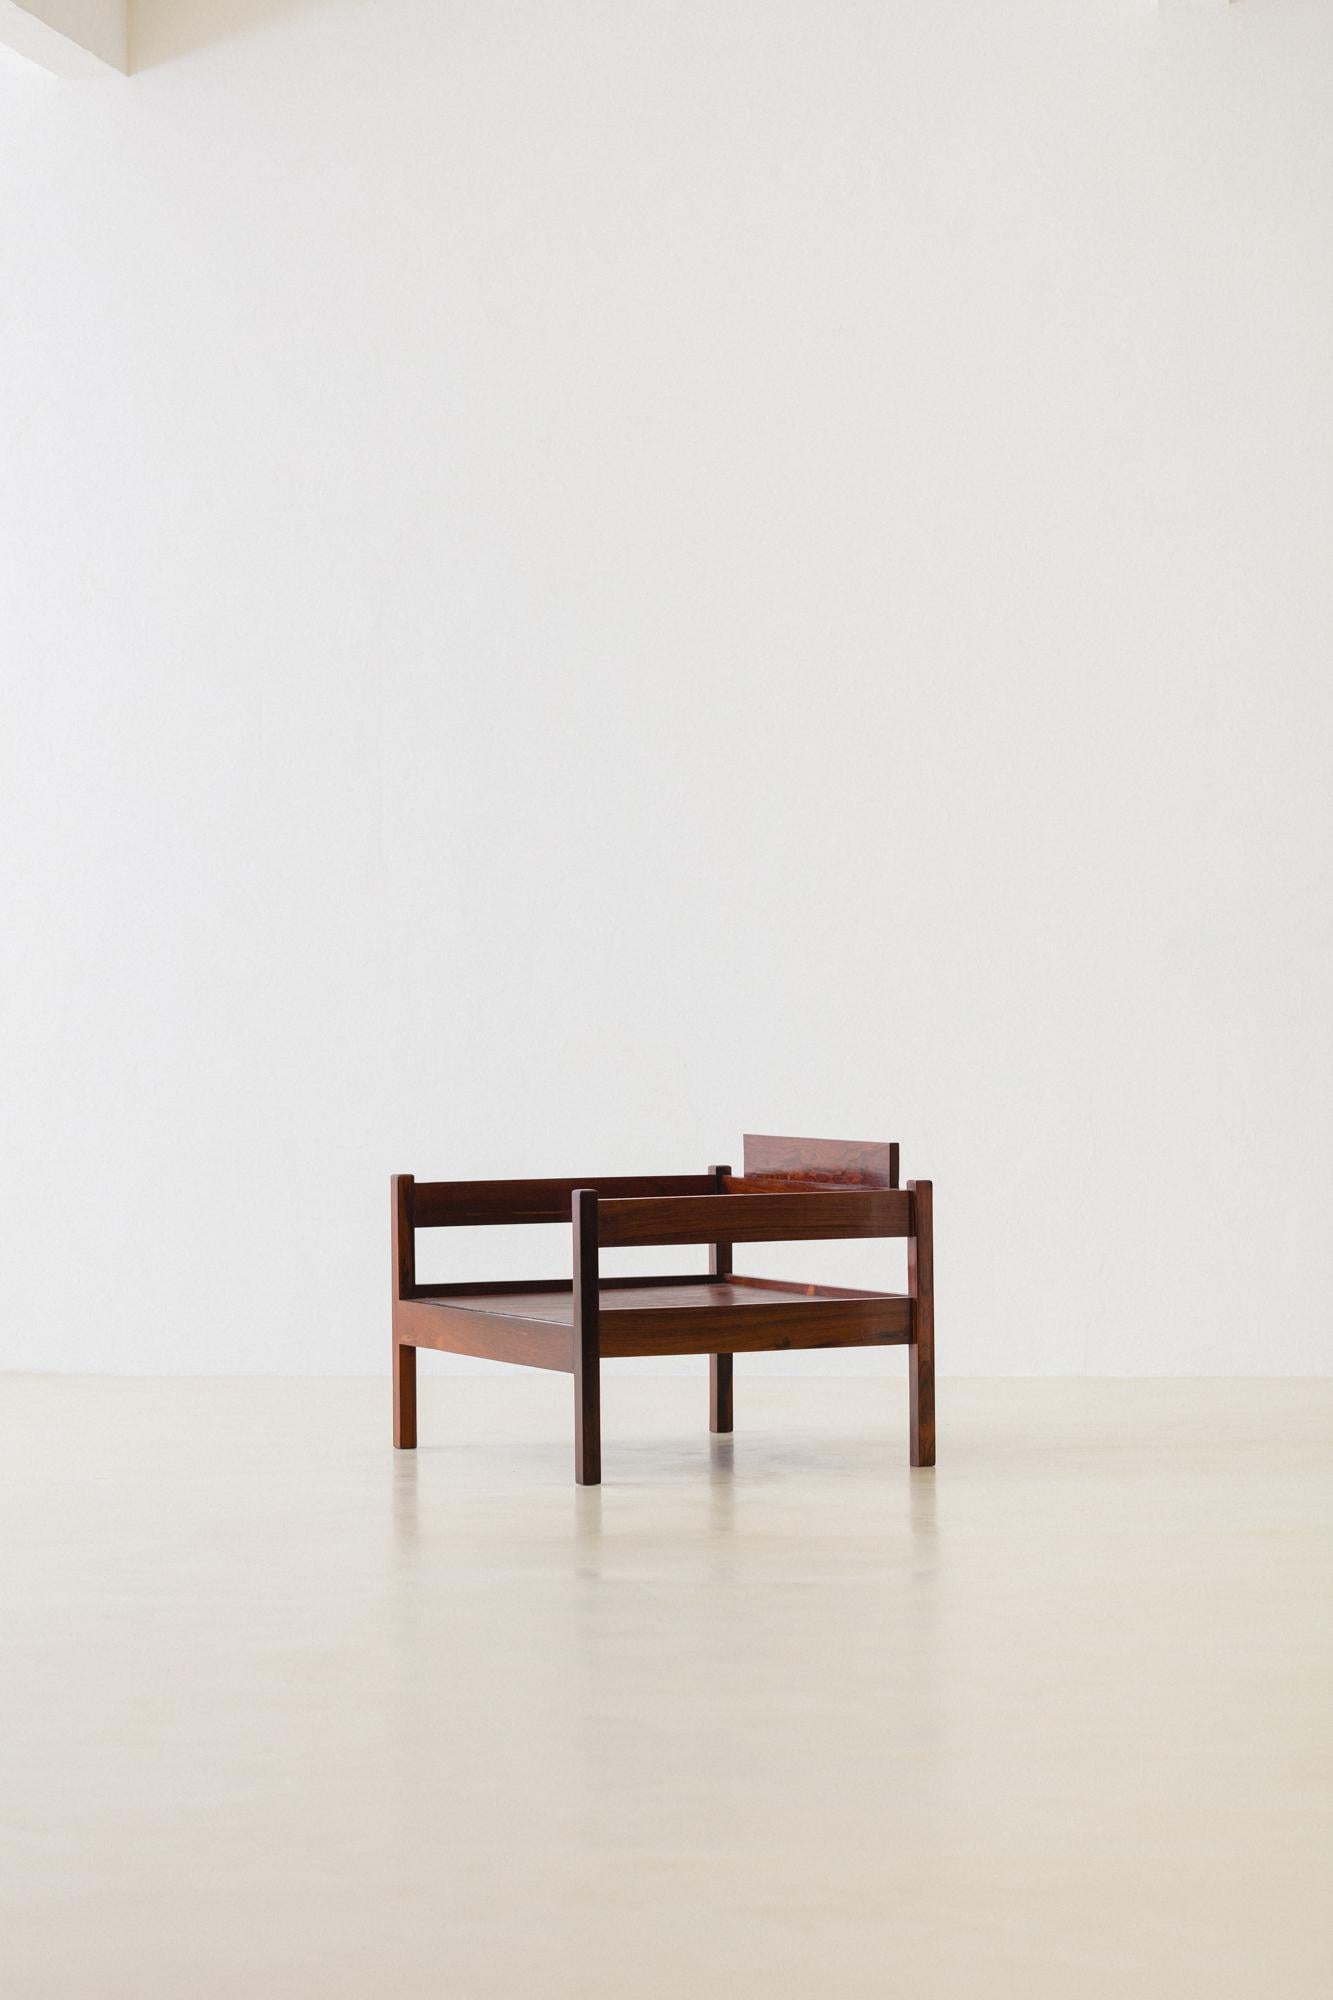 Linen Pair of Brazilian Rosewood Armchairs with Ottomans by Celina Decorações, 1960s For Sale